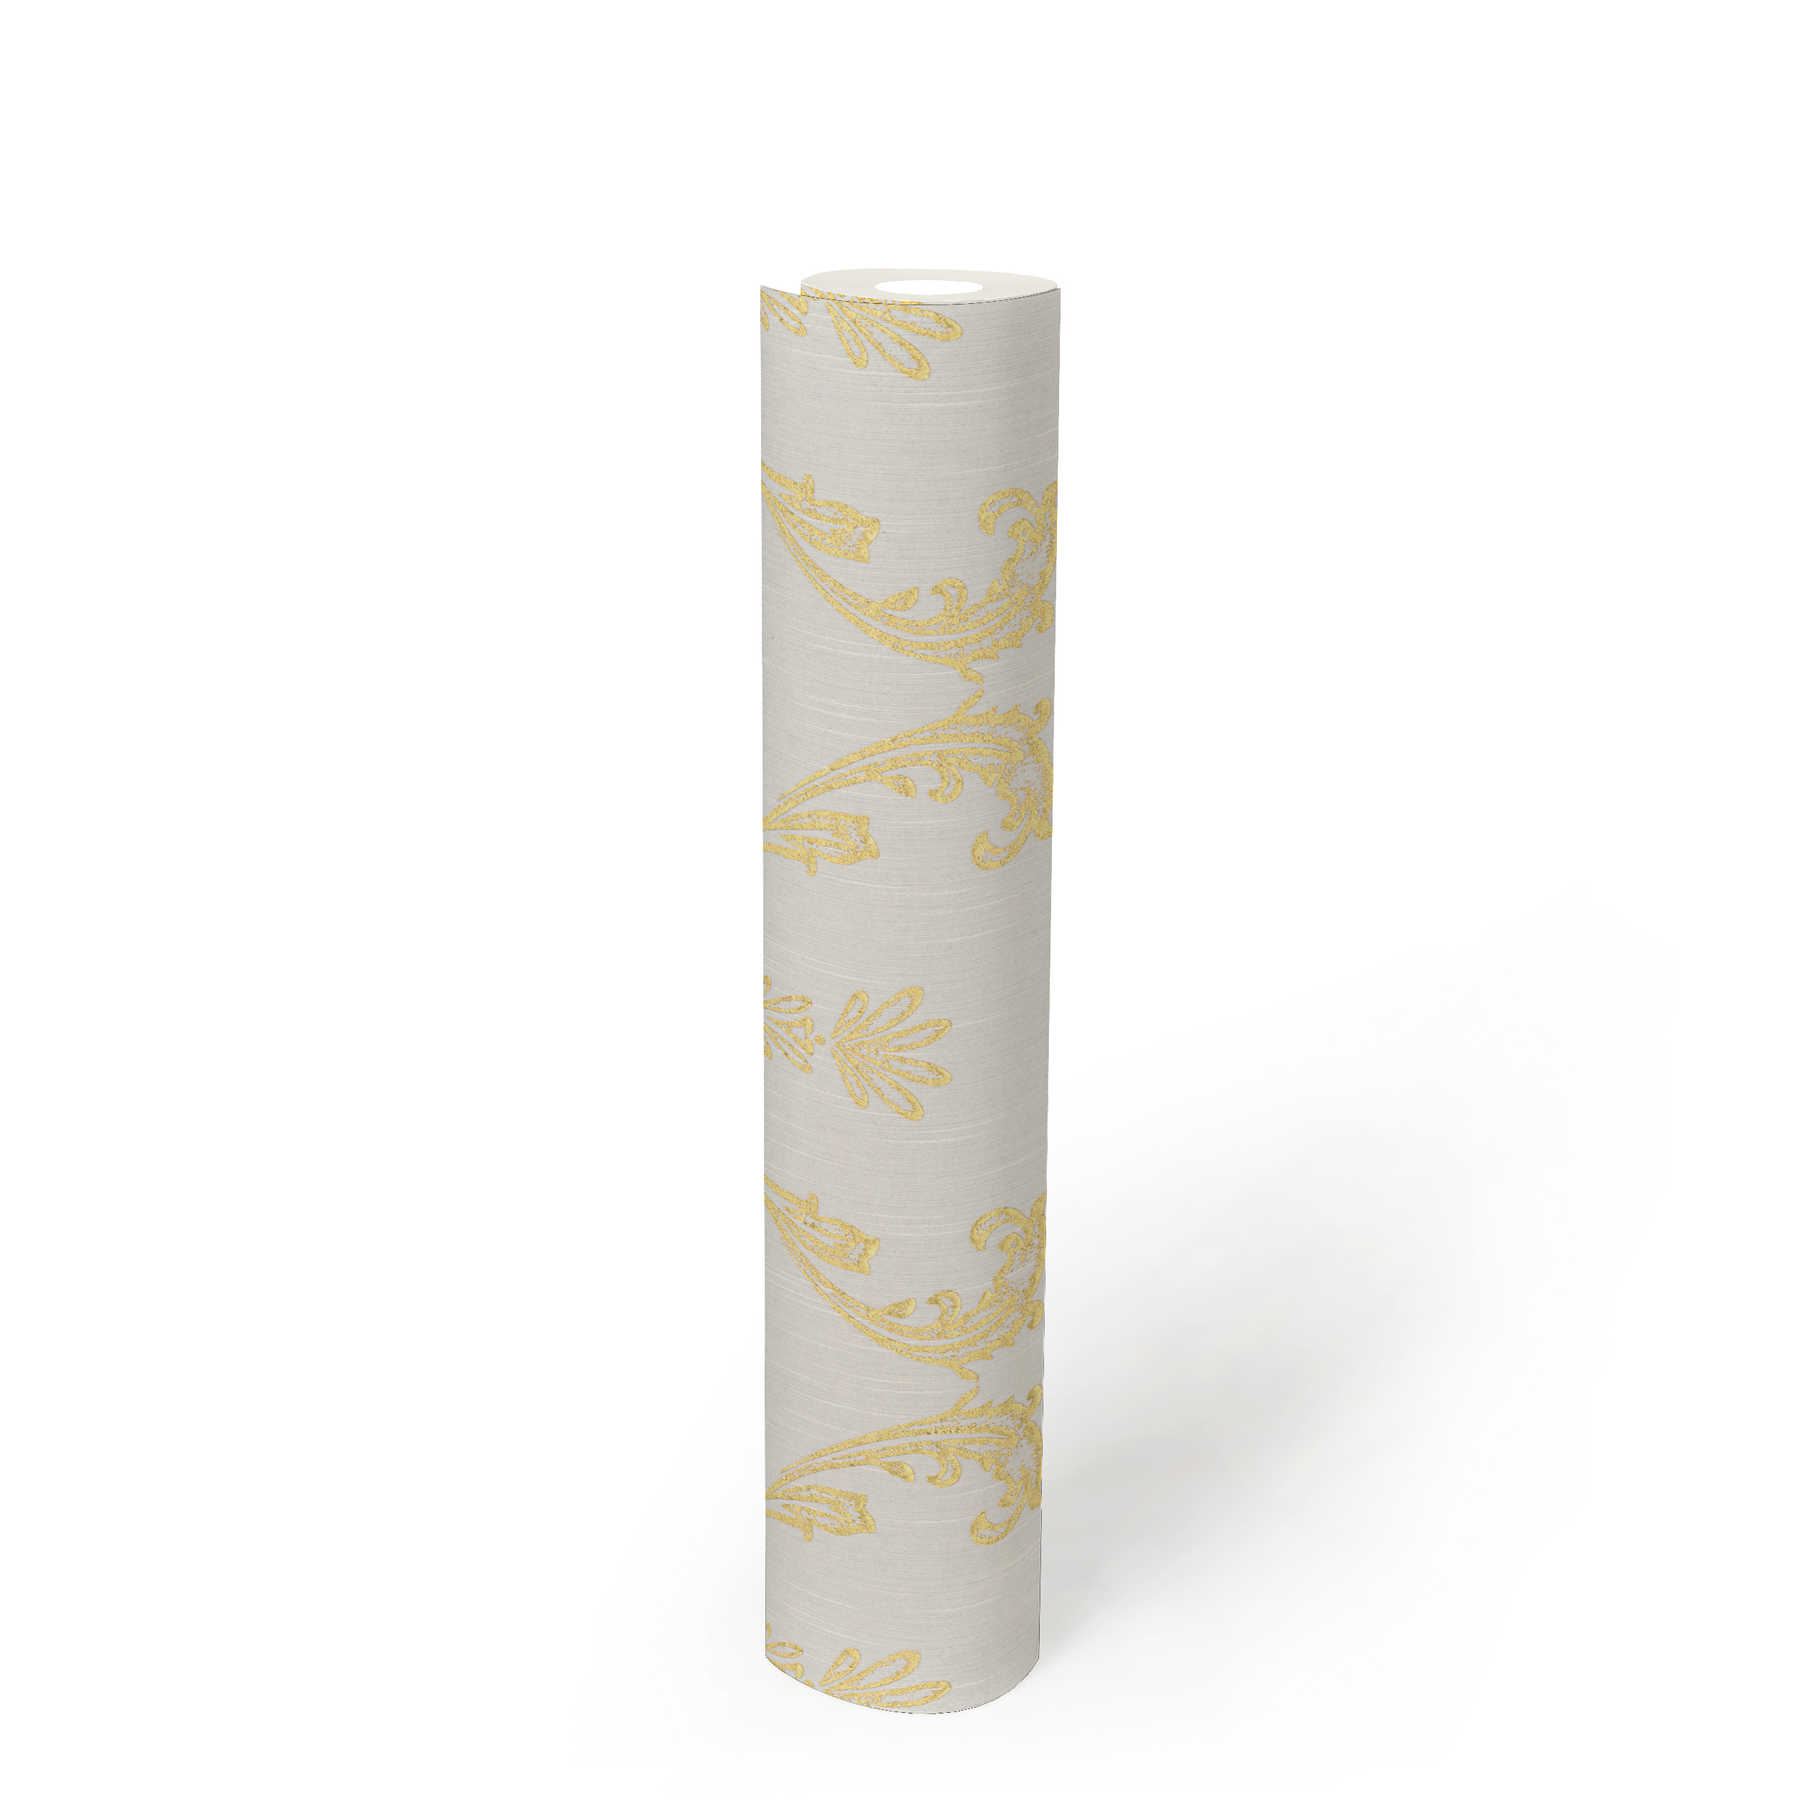             Ornamental wallpaper with floral elements in gold - gold, white
        